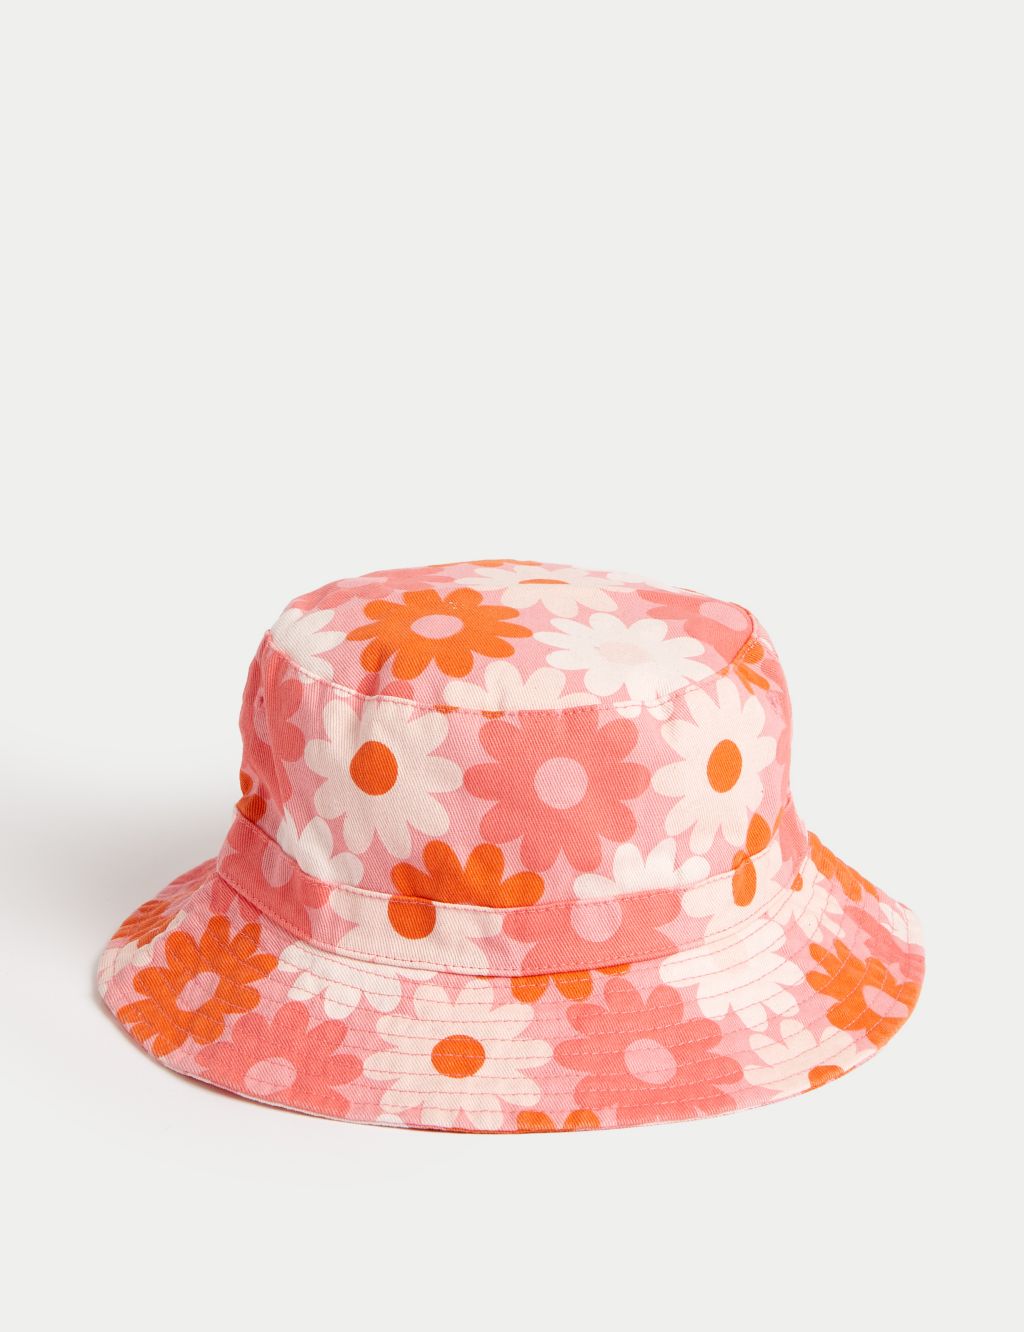 Kids' Pure Cotton Sun Hat (12 Months - 13 Years) image 2